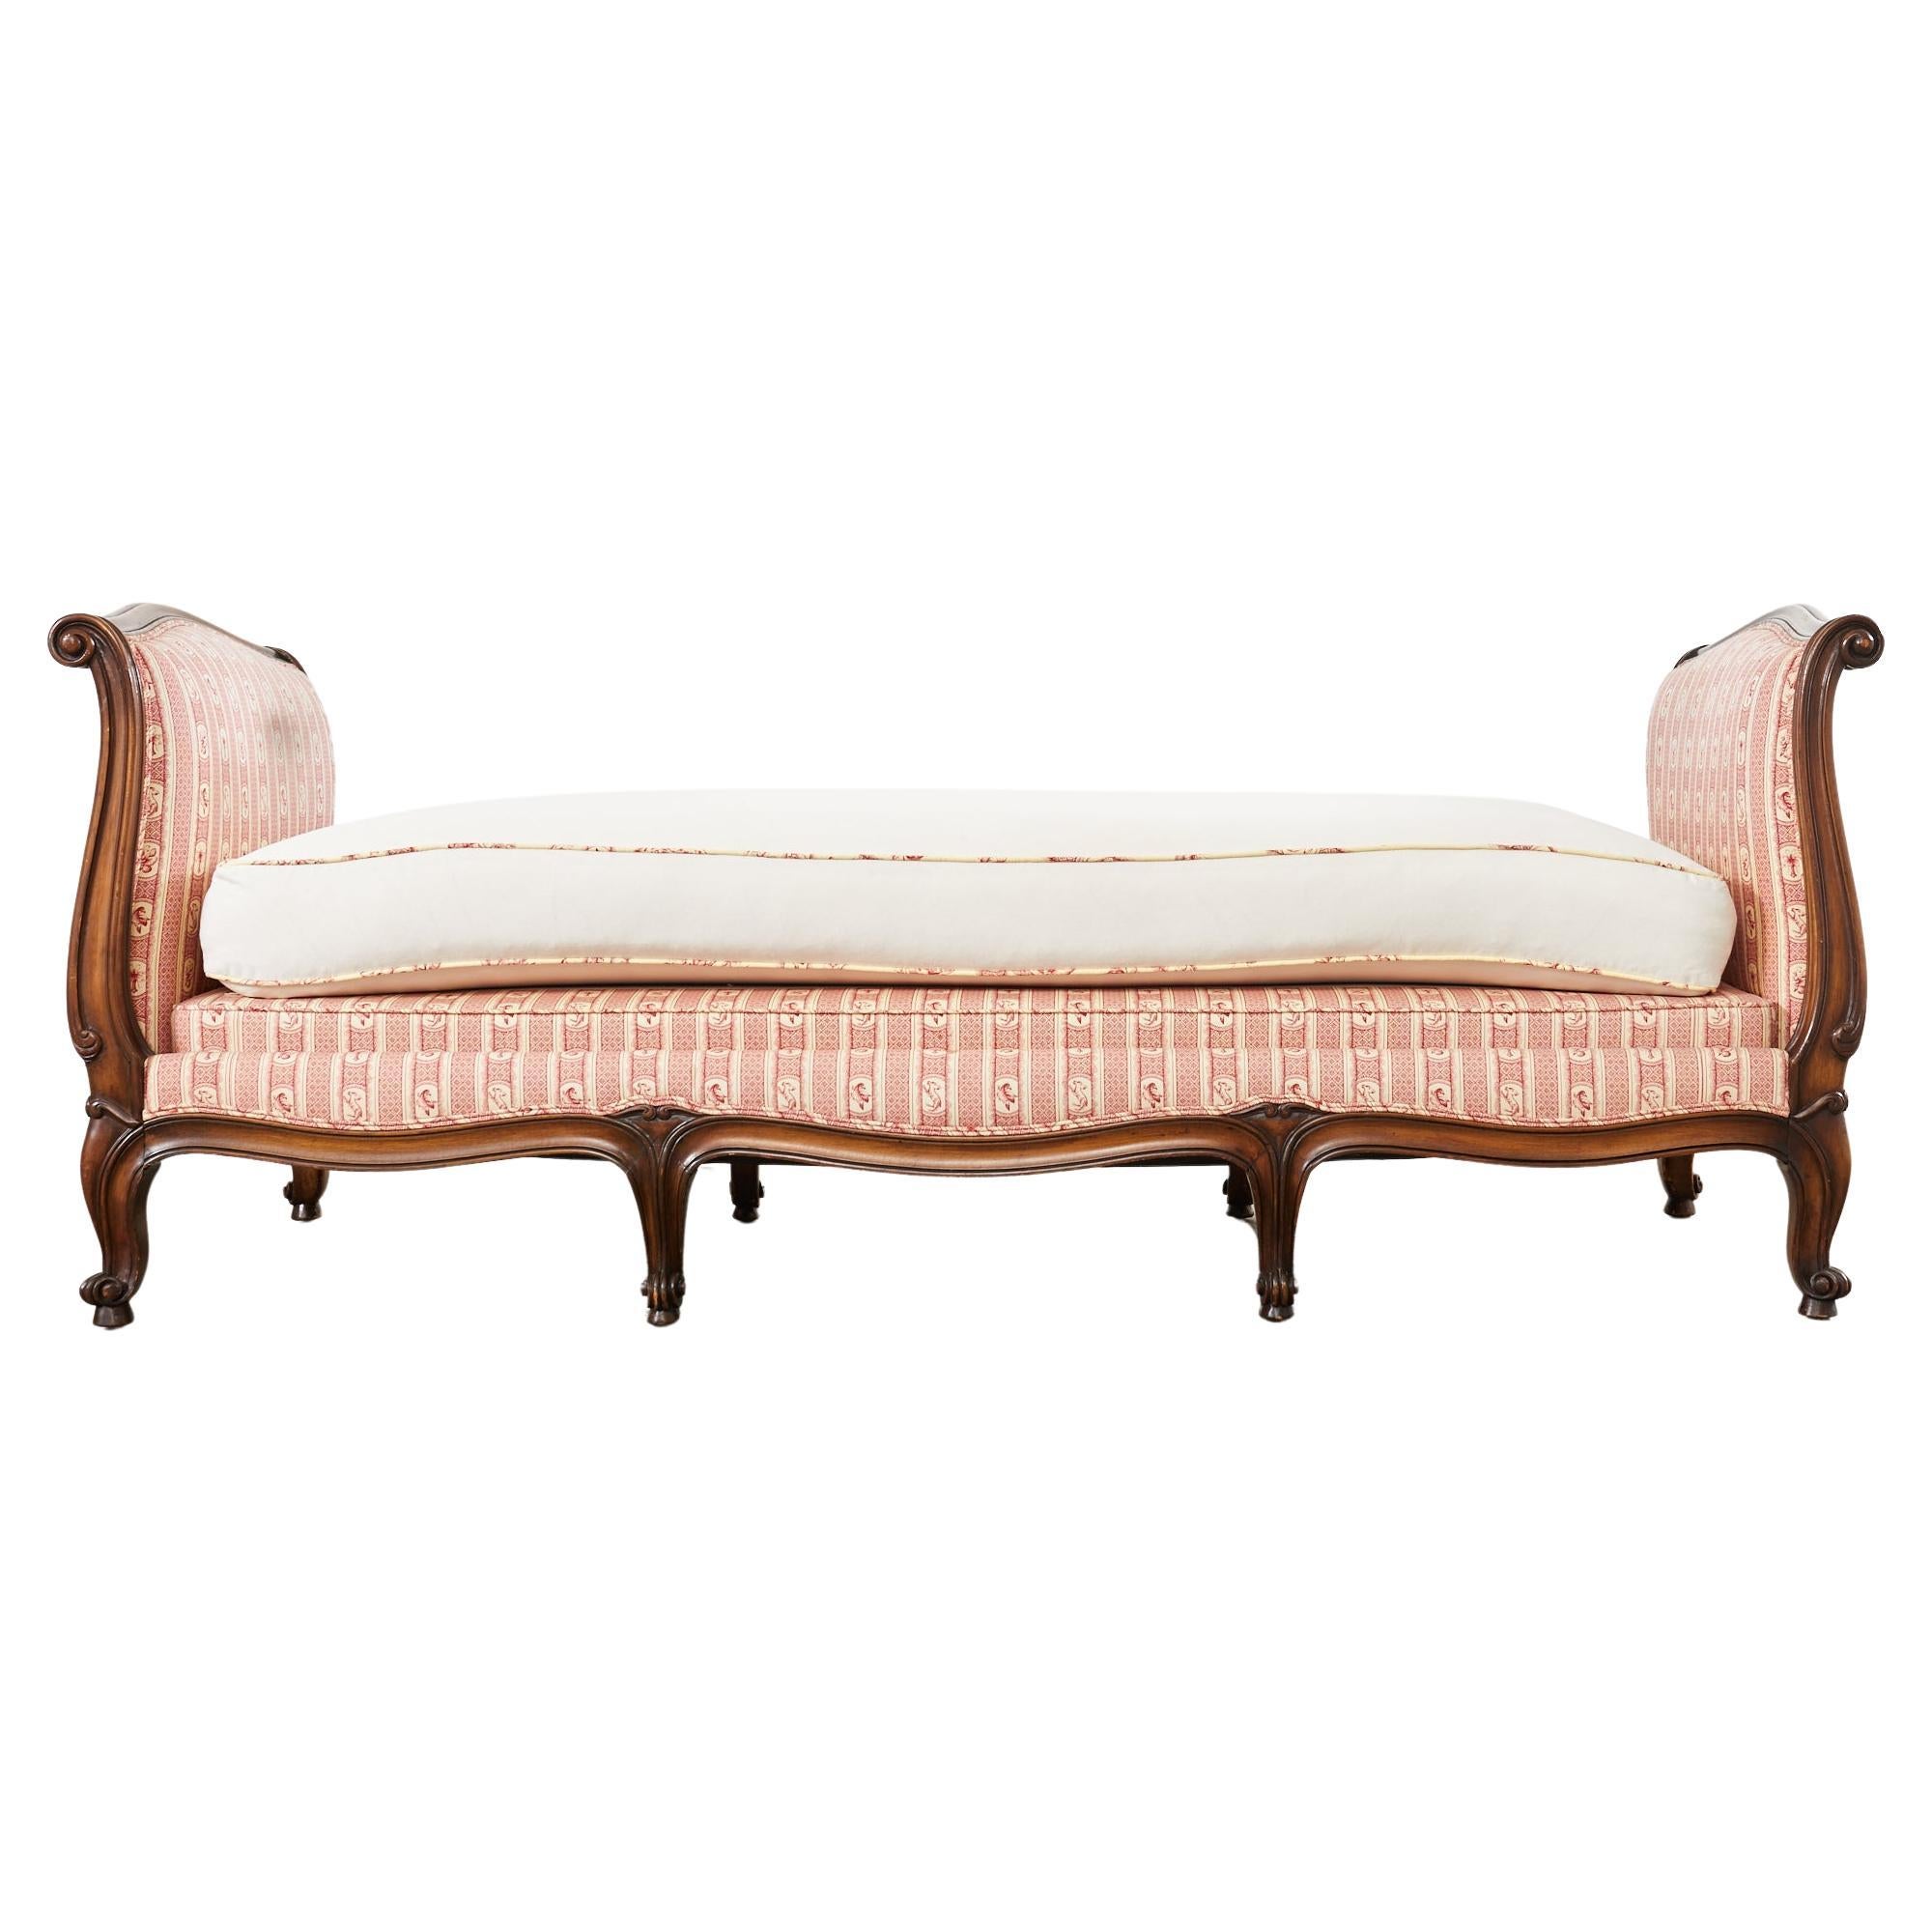 19th Century Country French Provincial Style Carved Beech Daybed